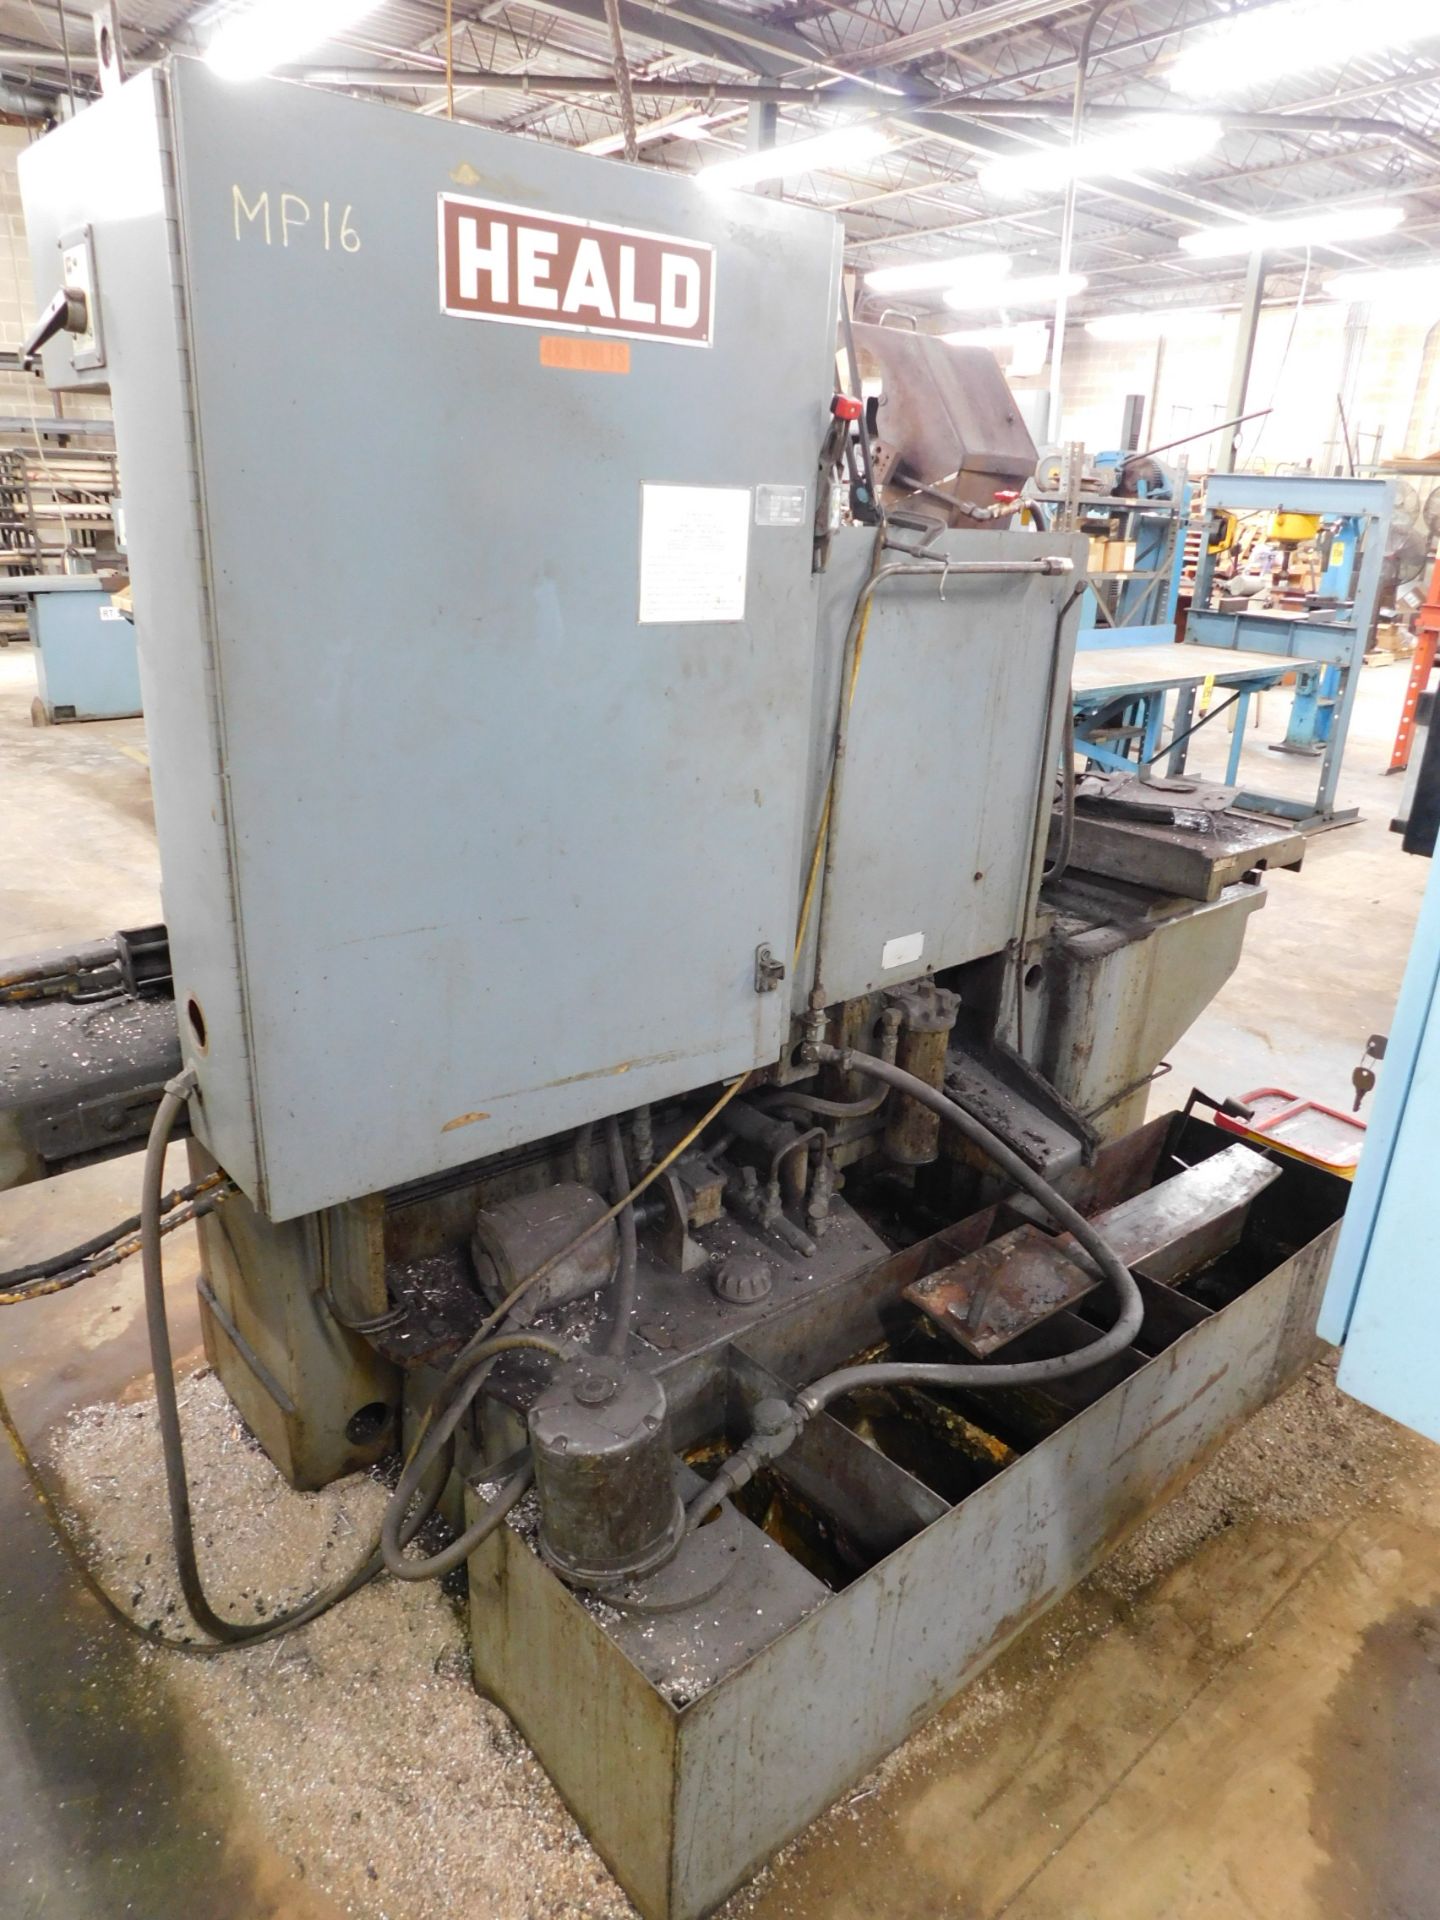 Heald 273A Internal Grinder, s/n 44467, 12” Diameter Magnetic Chuck, Heald Red Head Spindle, - Image 10 of 10